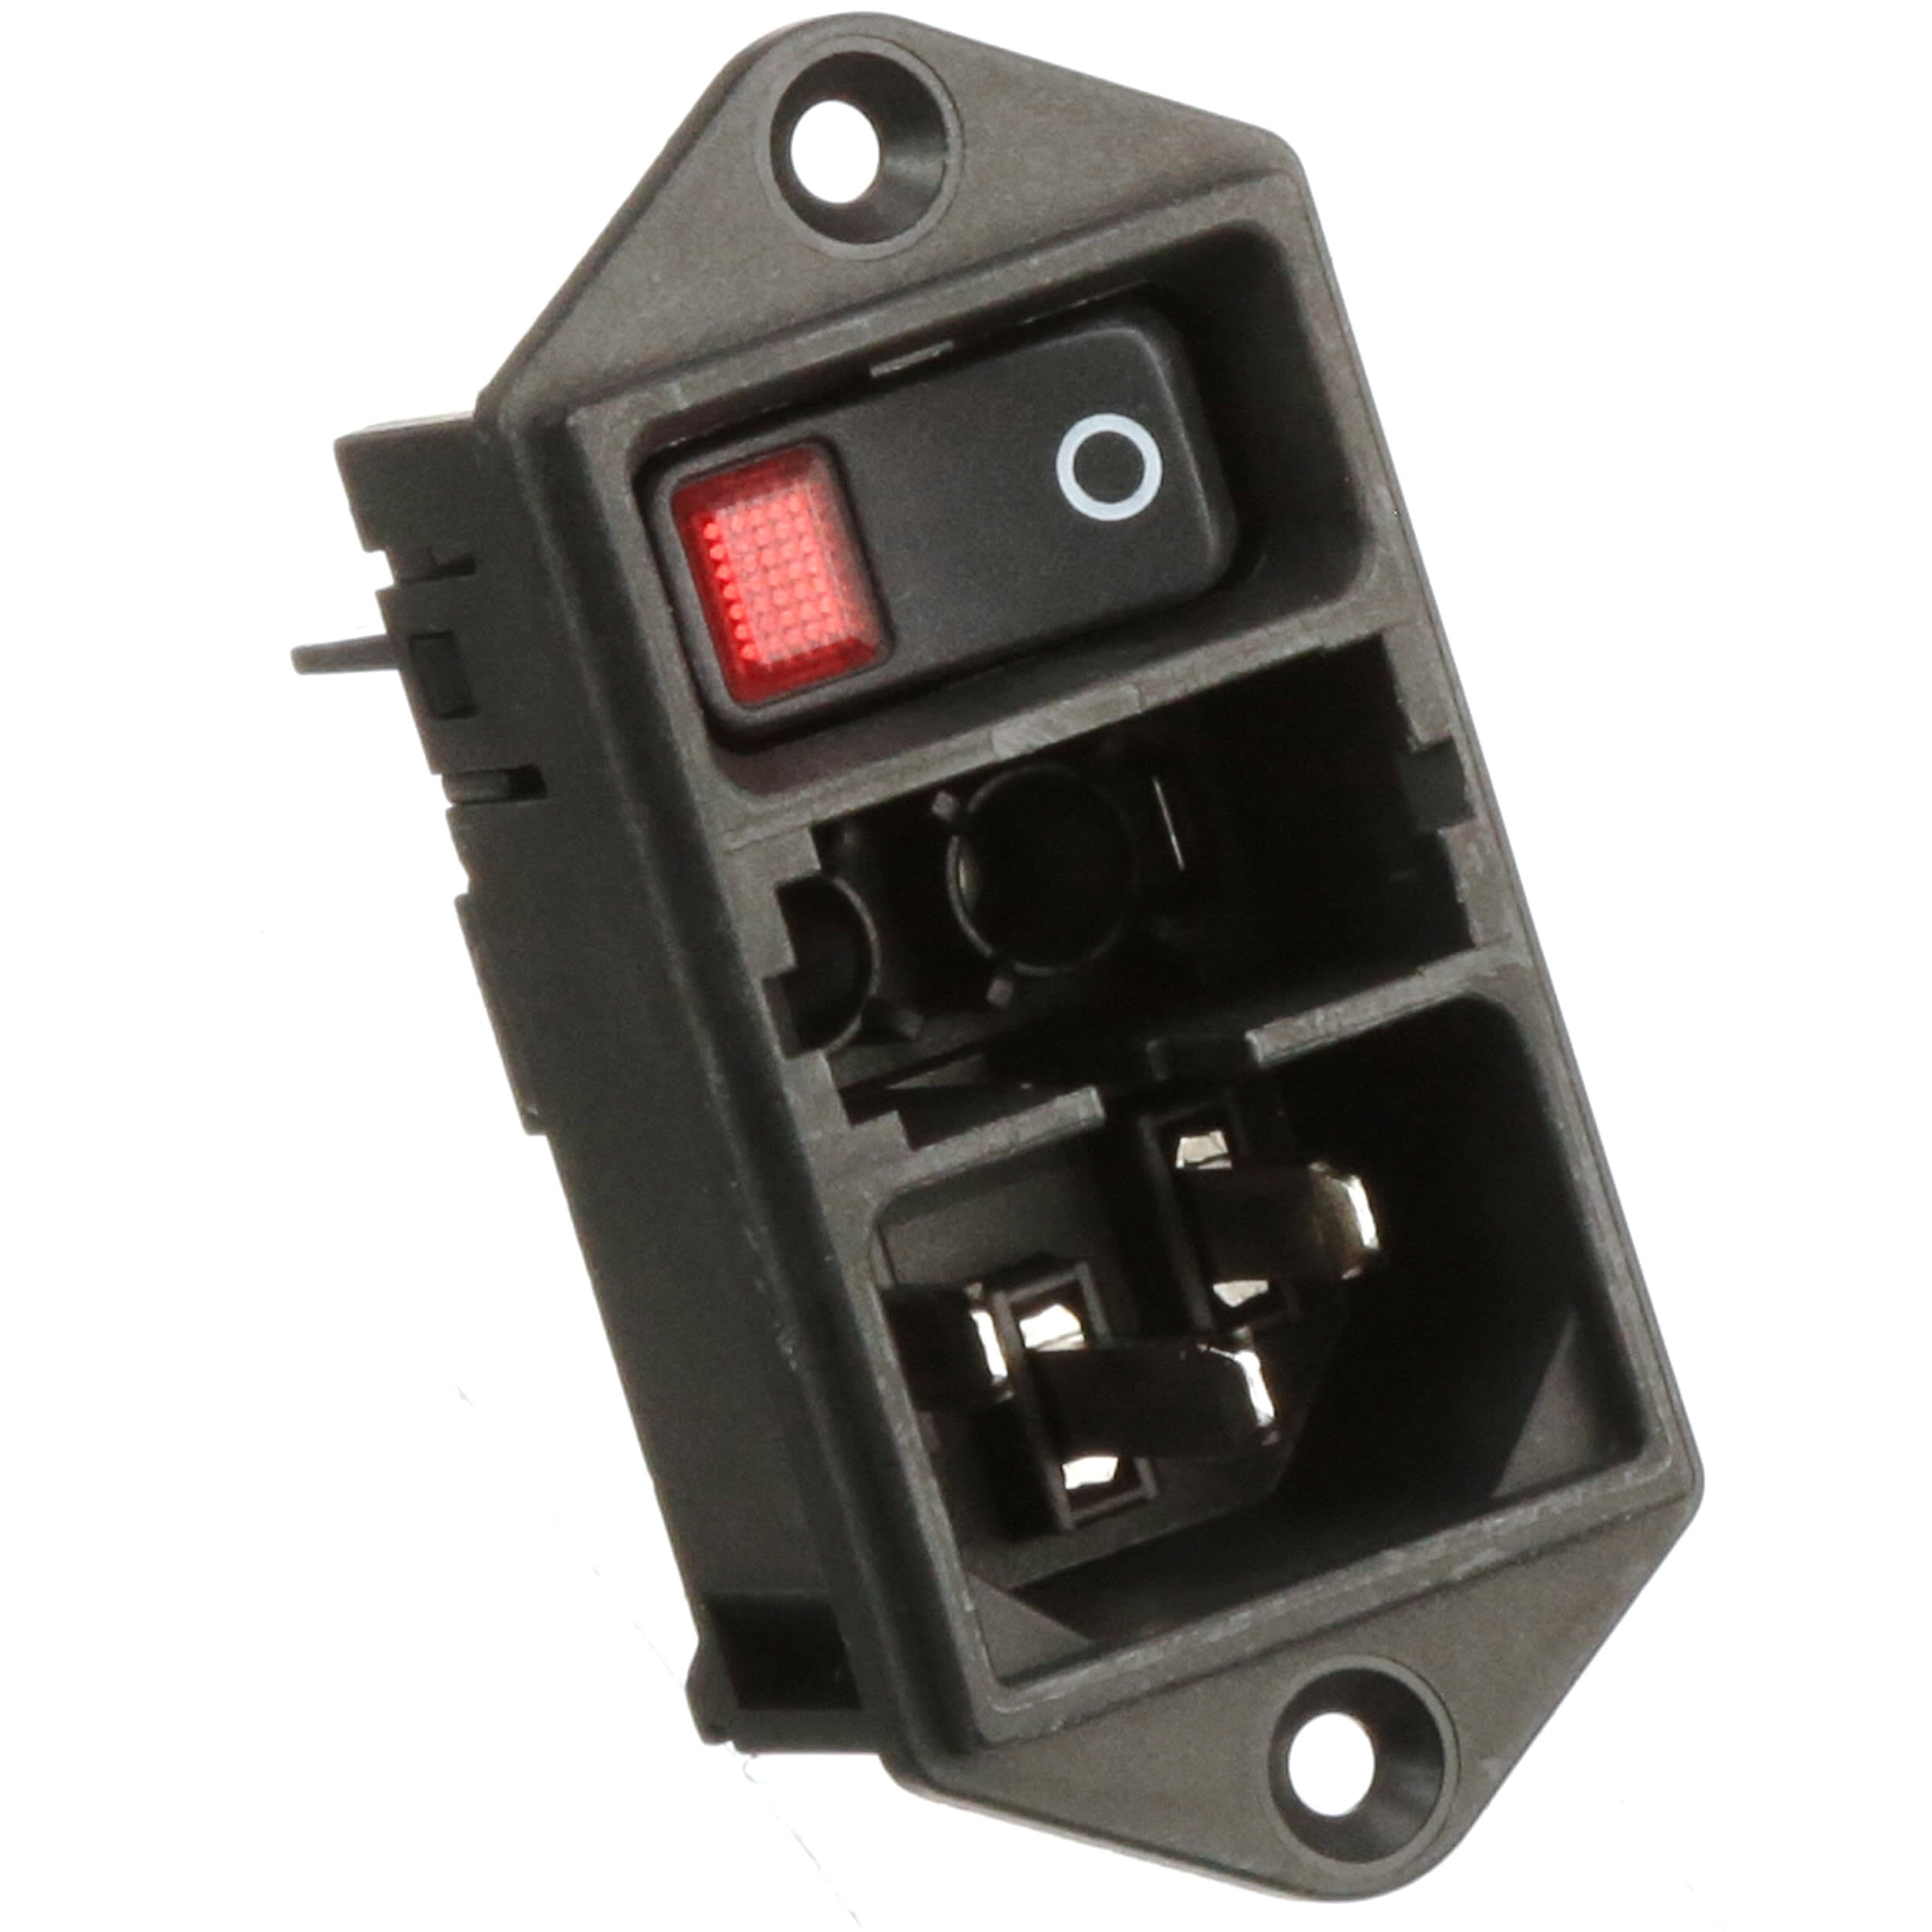 250 VAC DD11.0121.1110 10 A Power Entry Connector Plug SCHURTER Quick Connect Panel Mount DD11 Series 